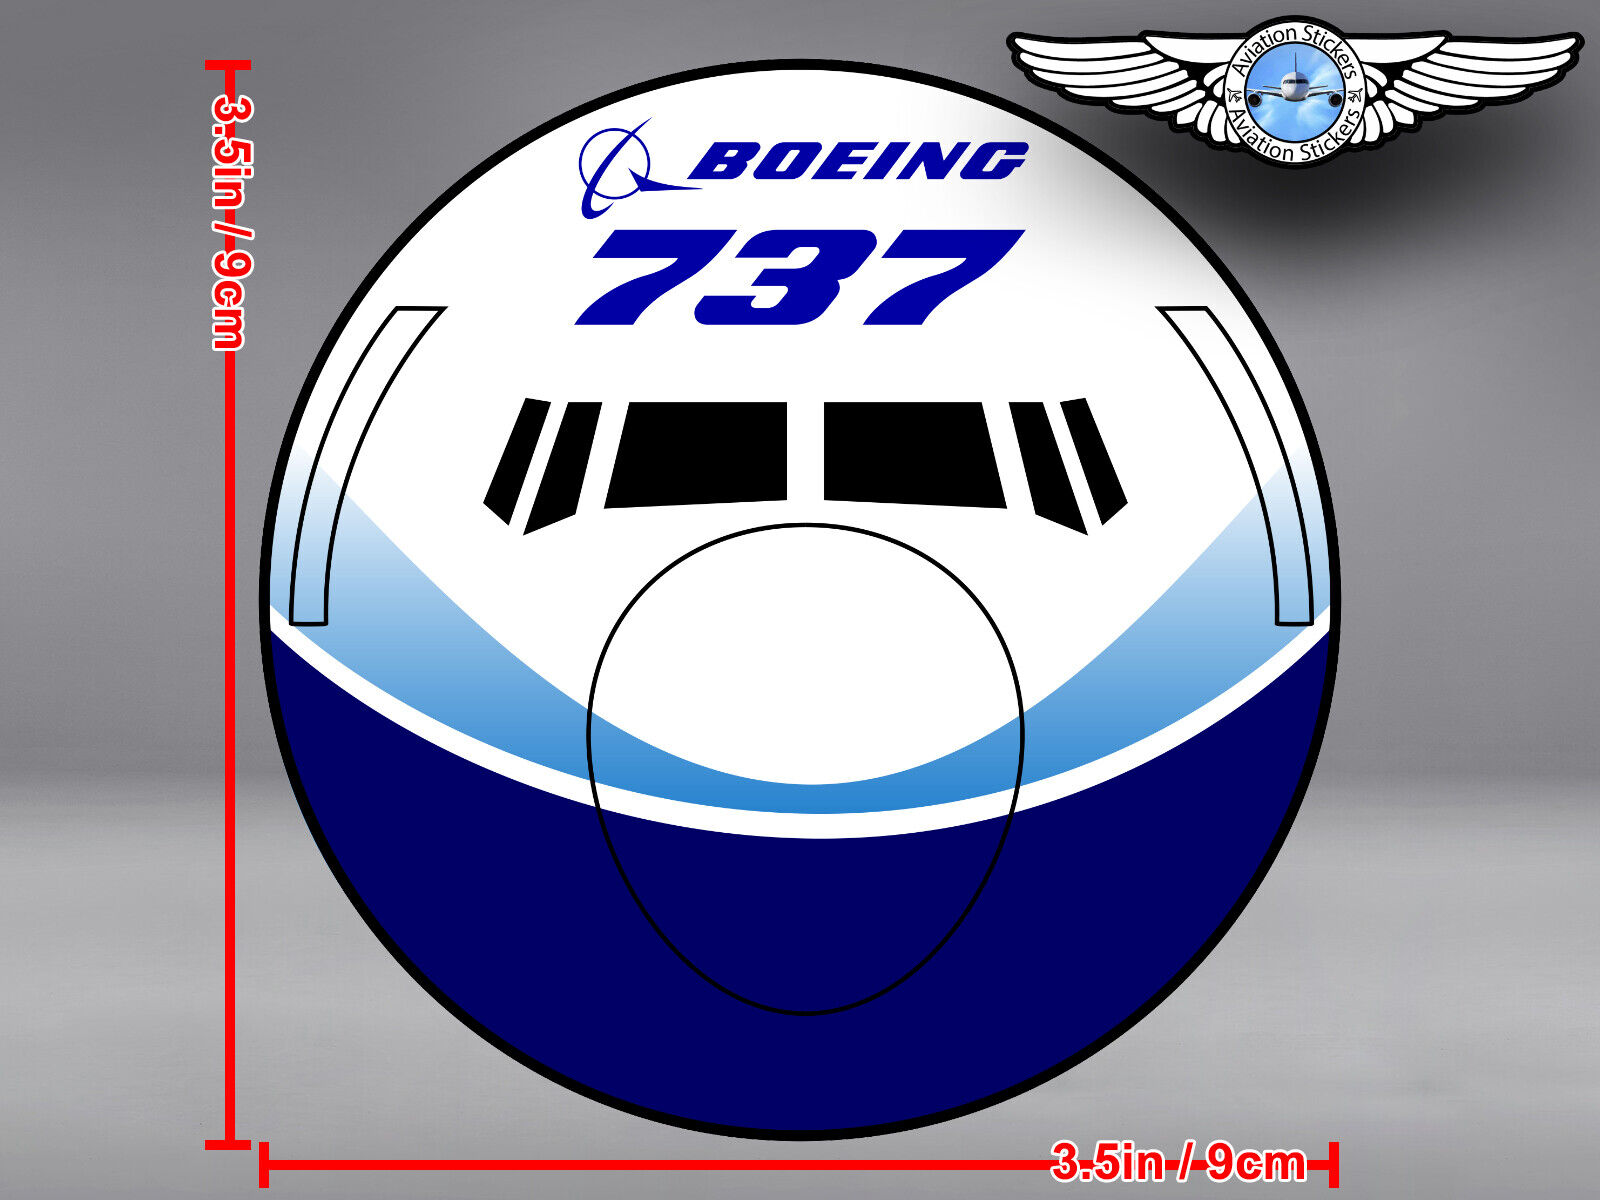 BOEING 737 B737 NG NEW GENERATION DREAMLINER LIVERY FRONT VIEW DECAL / STICKER